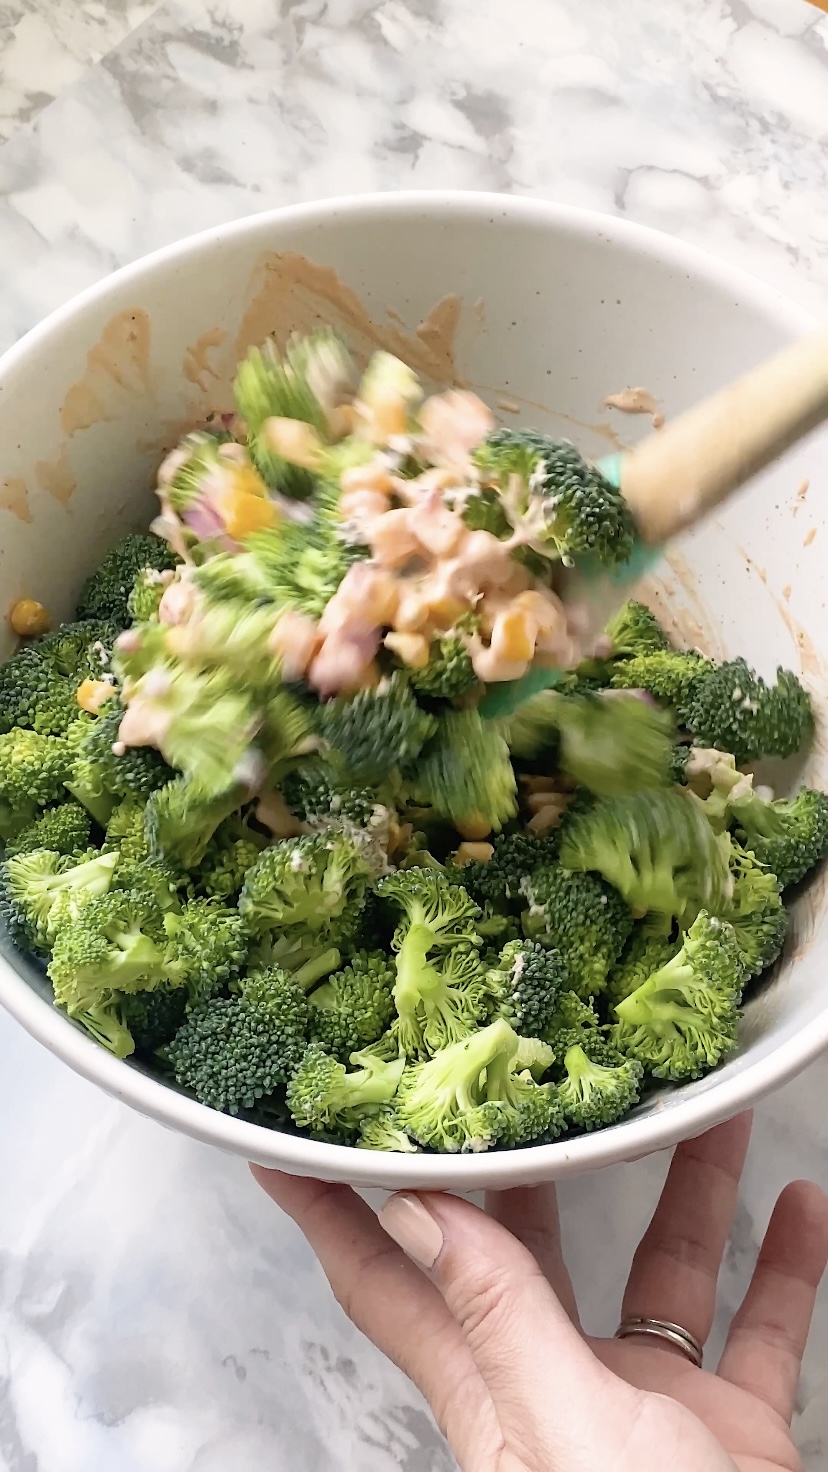 Corn is mixed into broccoli in a bowl.